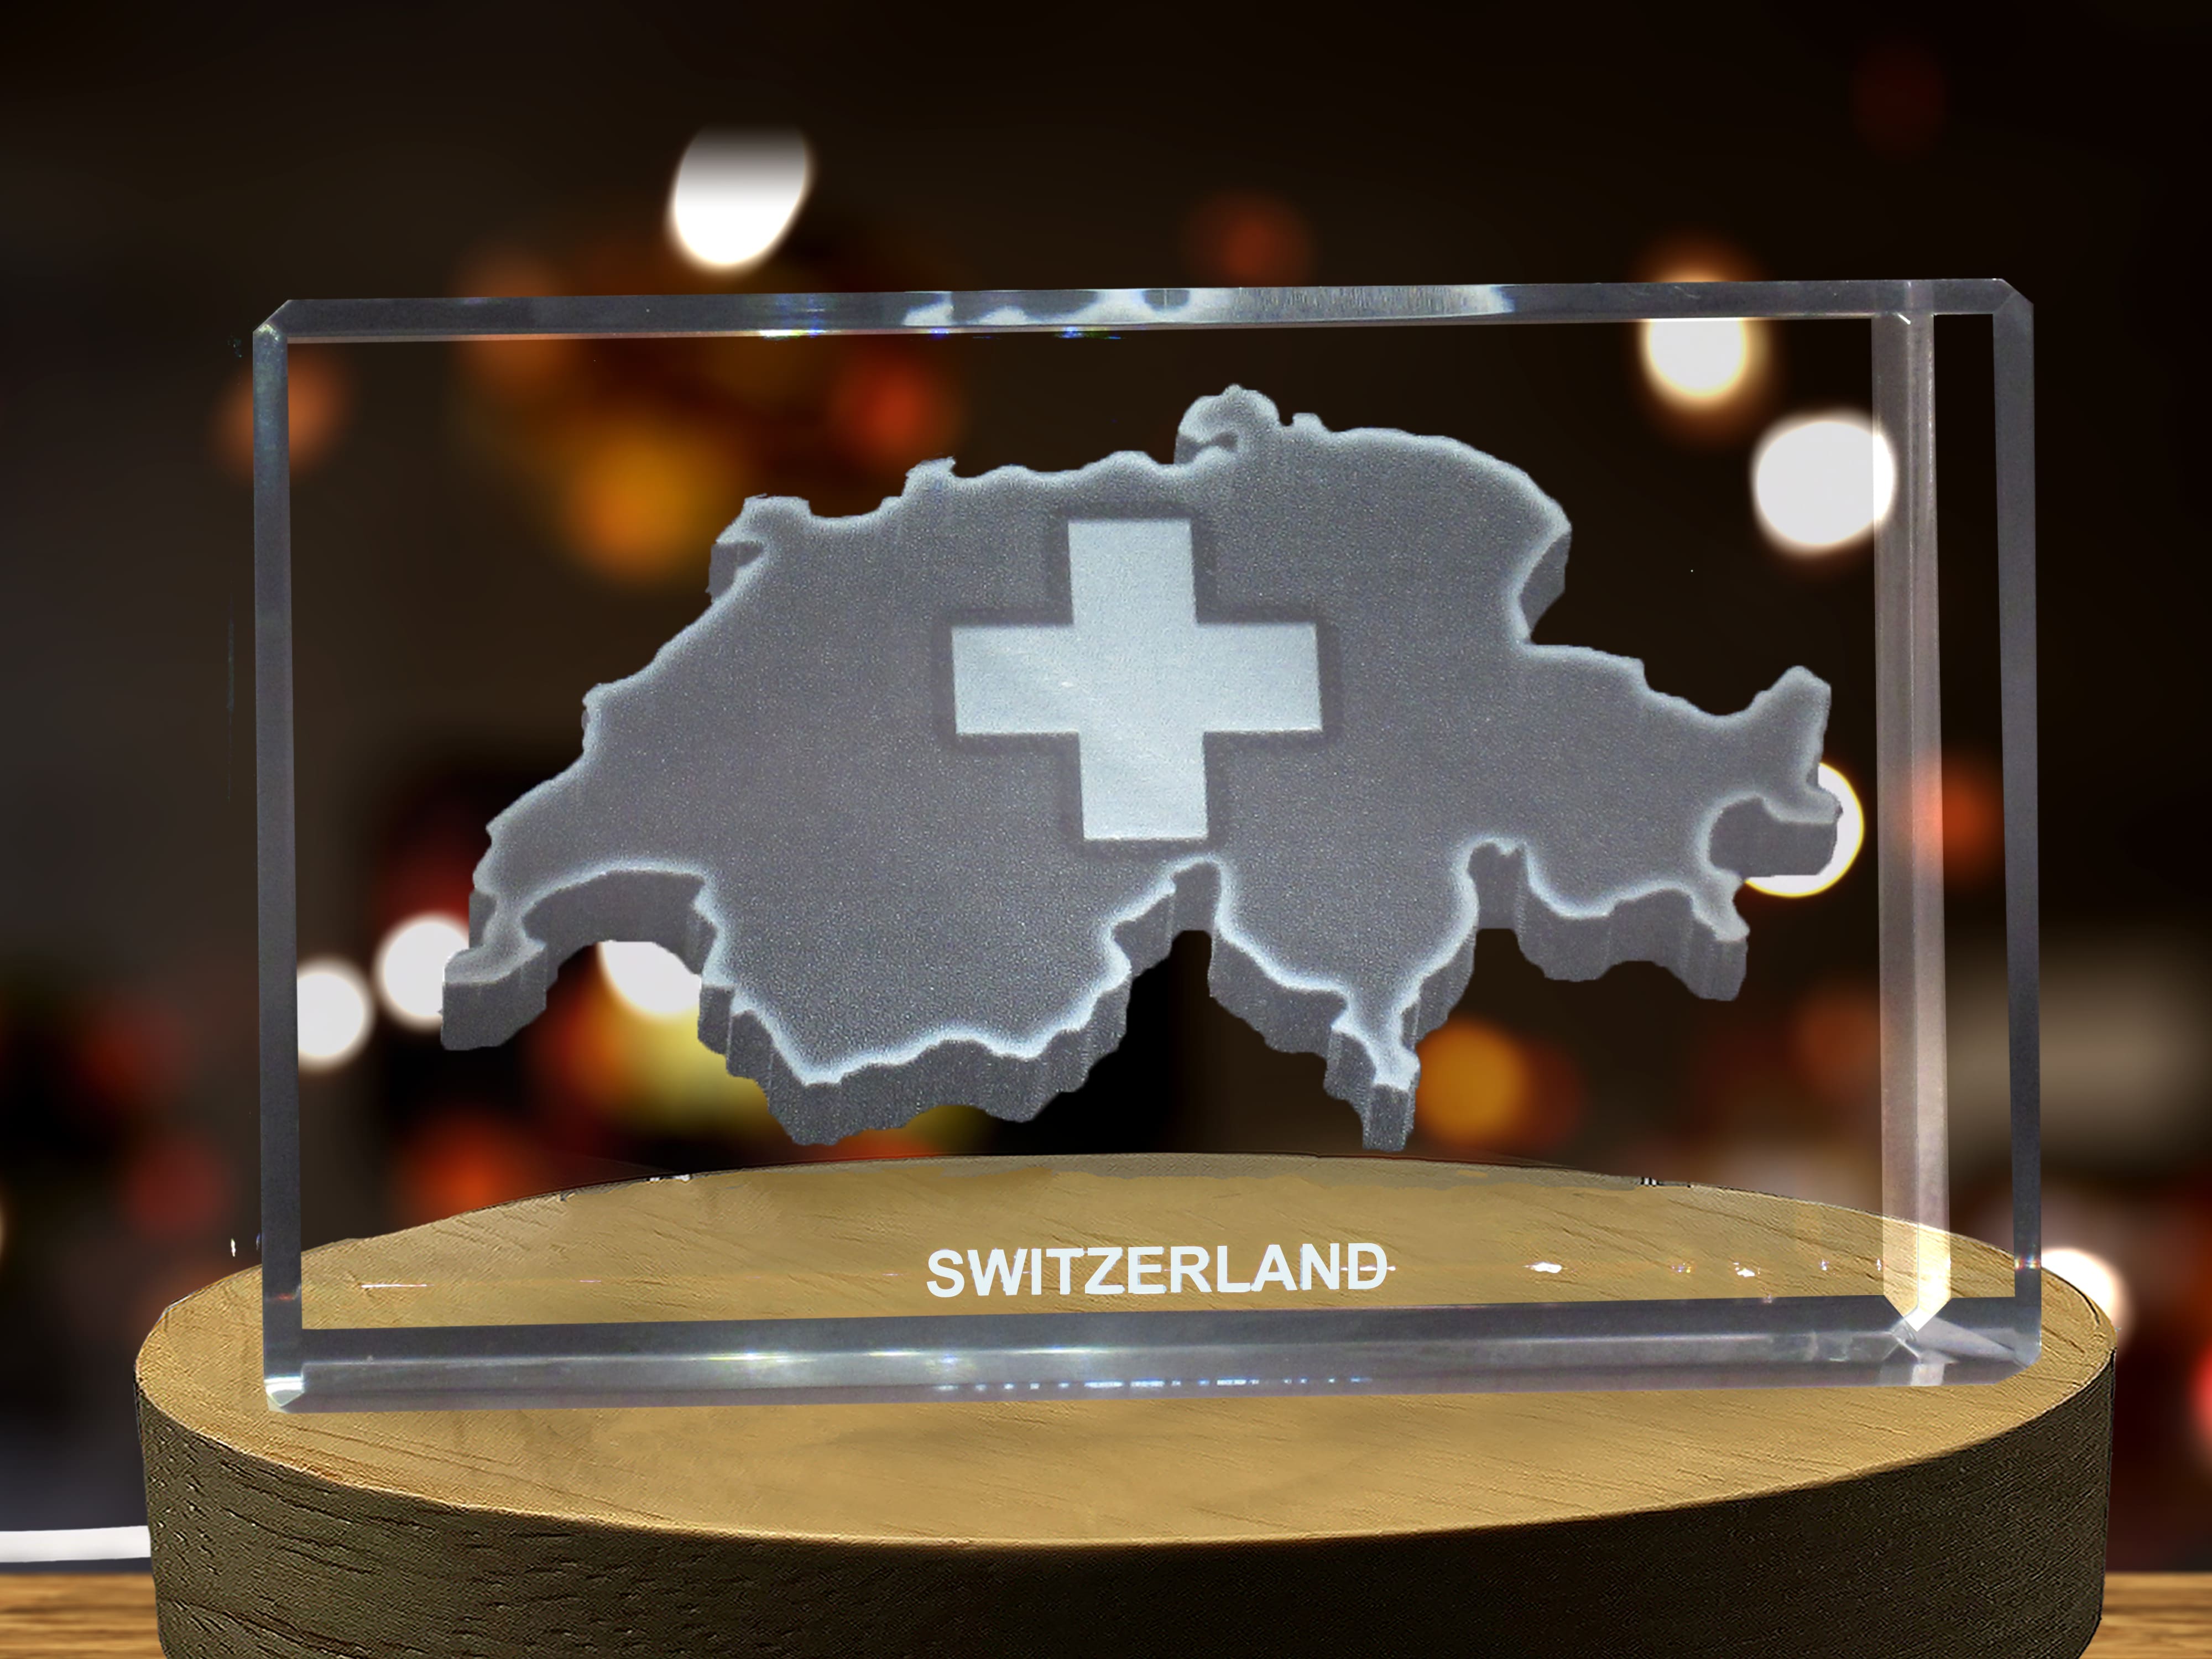 Switzerland 3D Engraved Crystal 3D Engraved Crystal Keepsake/Gift/Decor/Collectible/Souvenir A&B Crystal Collection